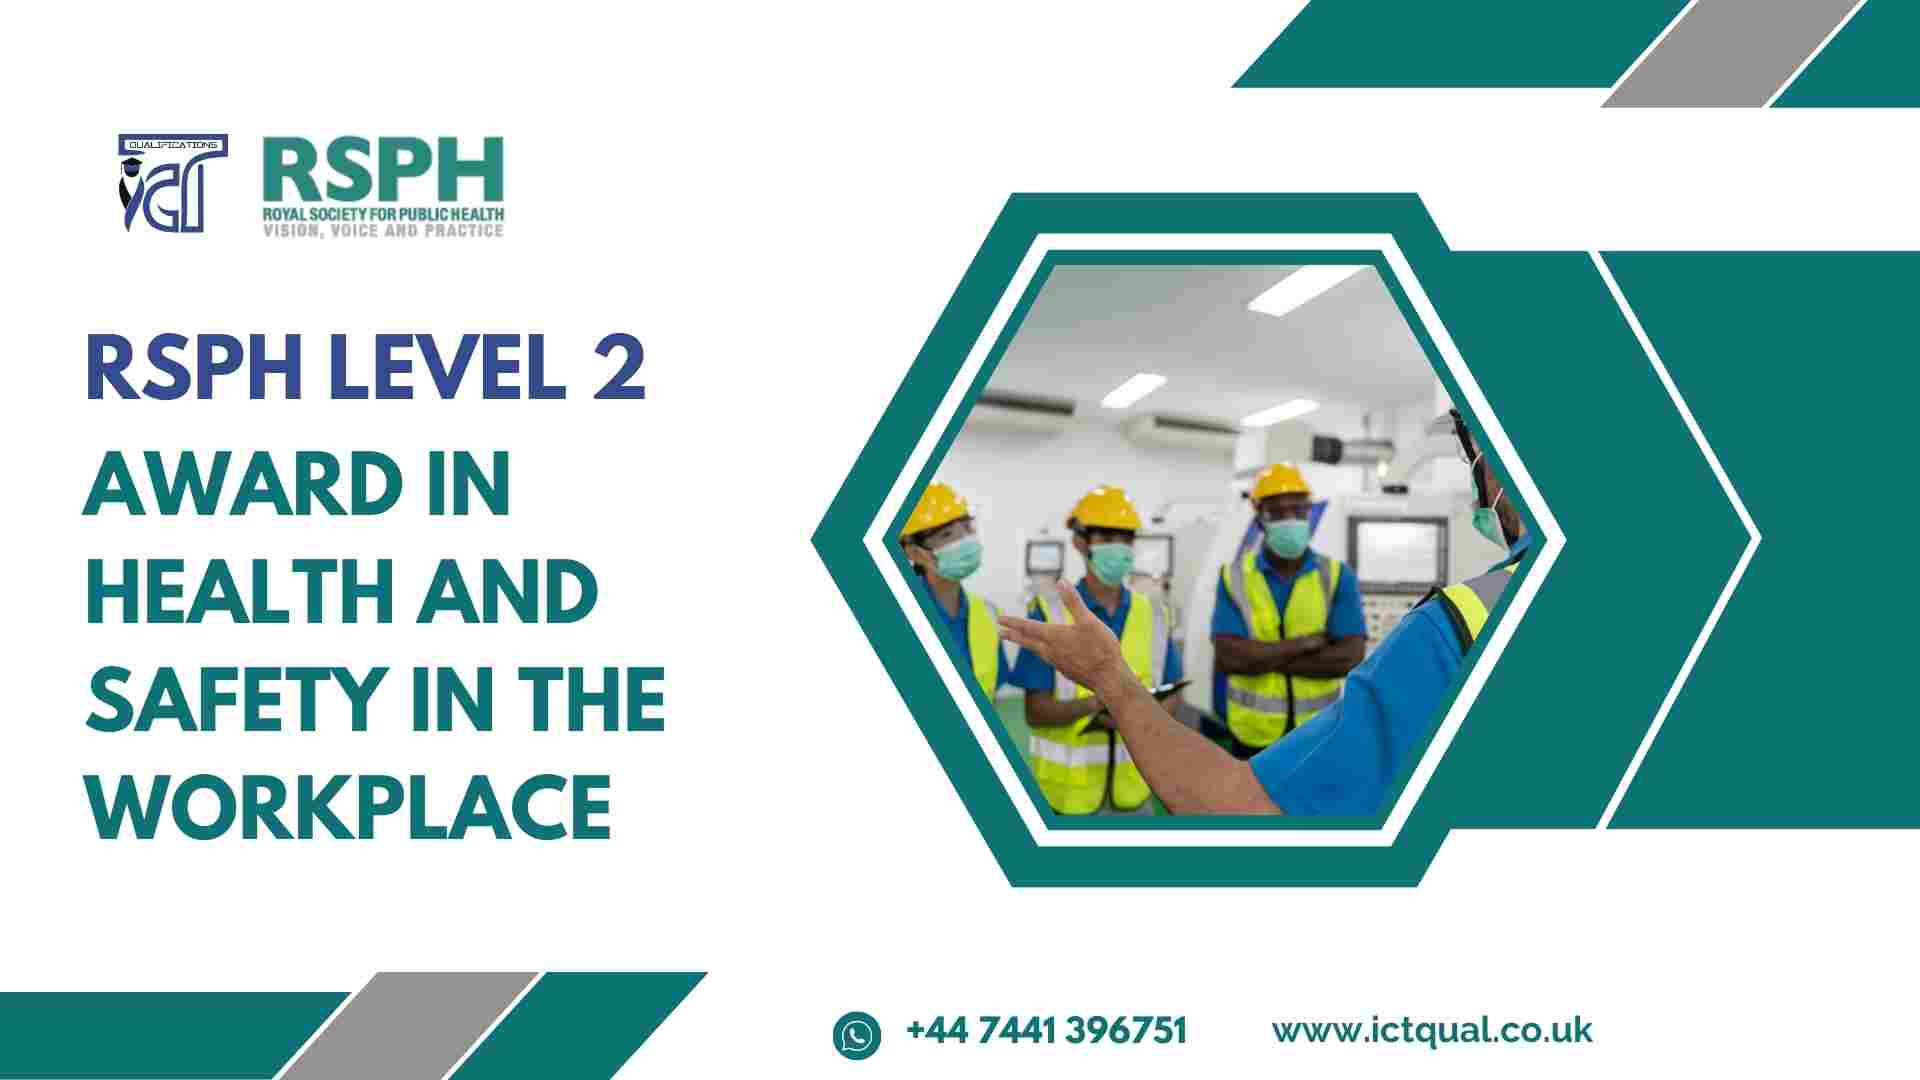 RSPH Level 2 Award in Health and Safety in the Workplace